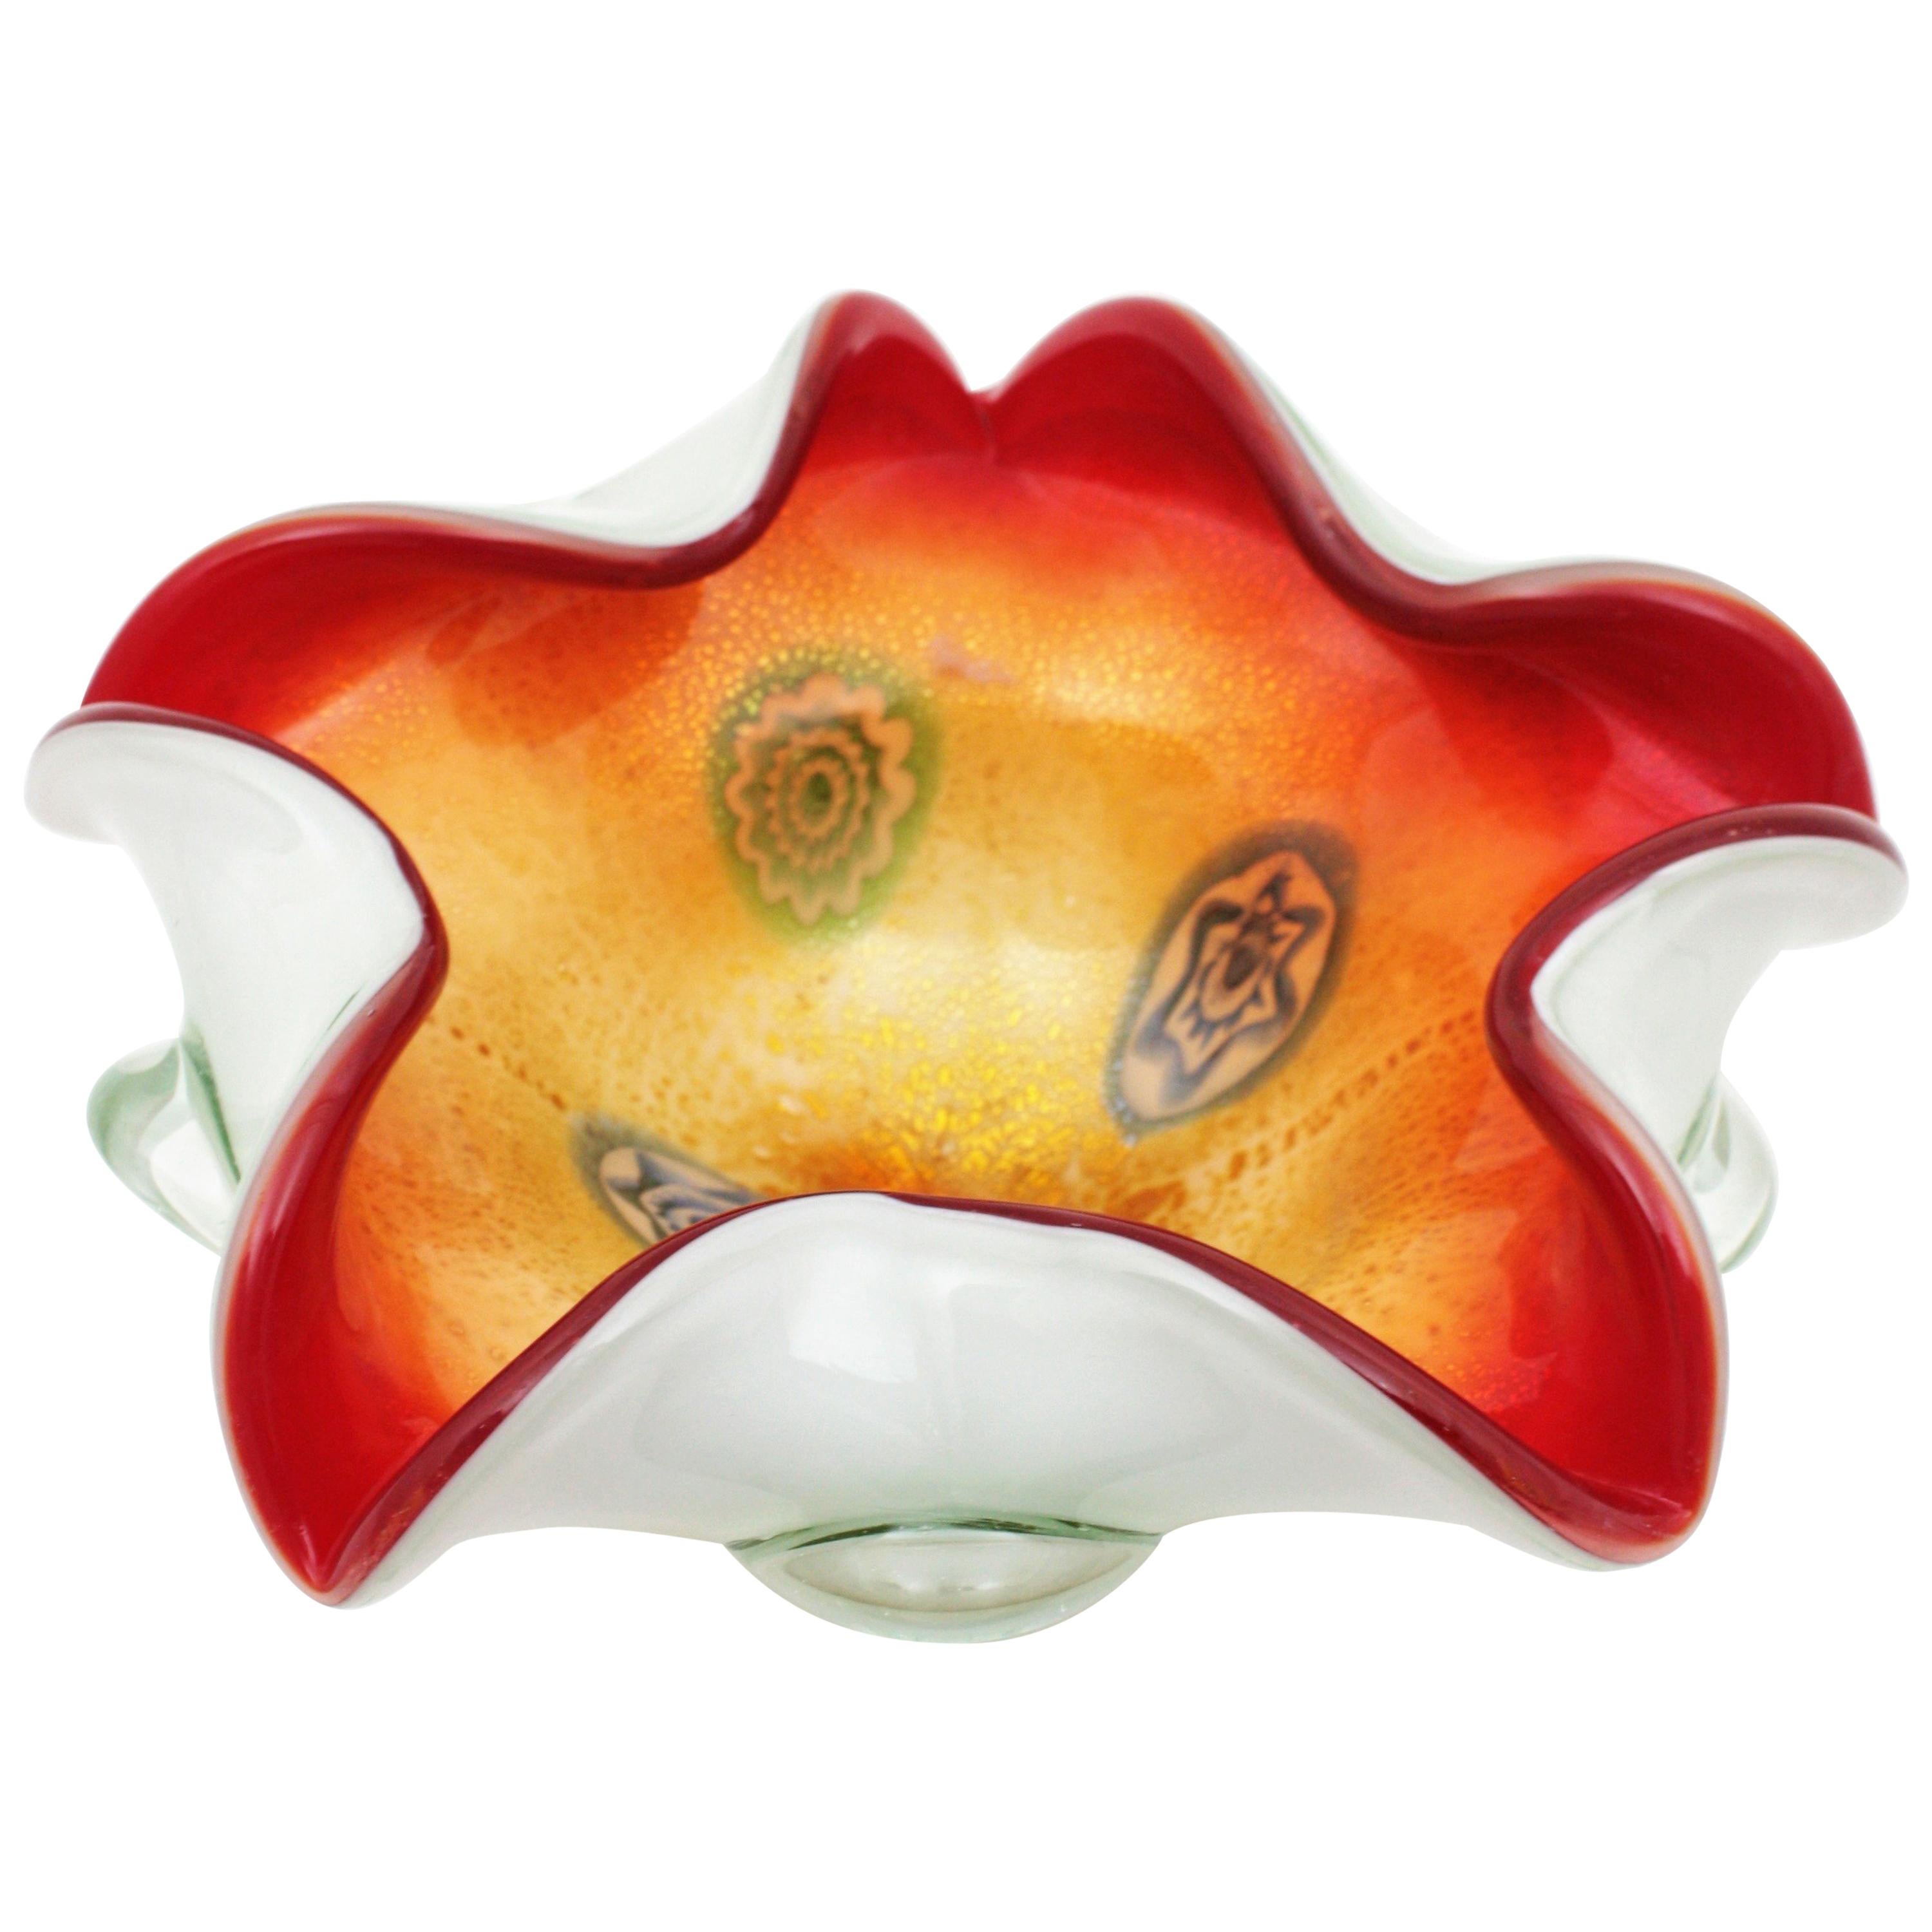 Italian Mid-Century Modern hand blown Murano art glass flower shaped centerpiece or bowl with Murrine decorations and aventurine gold and silver flecks. Attributed to Aldo Nason and manufactured by Arte Vetraria Muranese, AVEM.
Aldo Nason was one